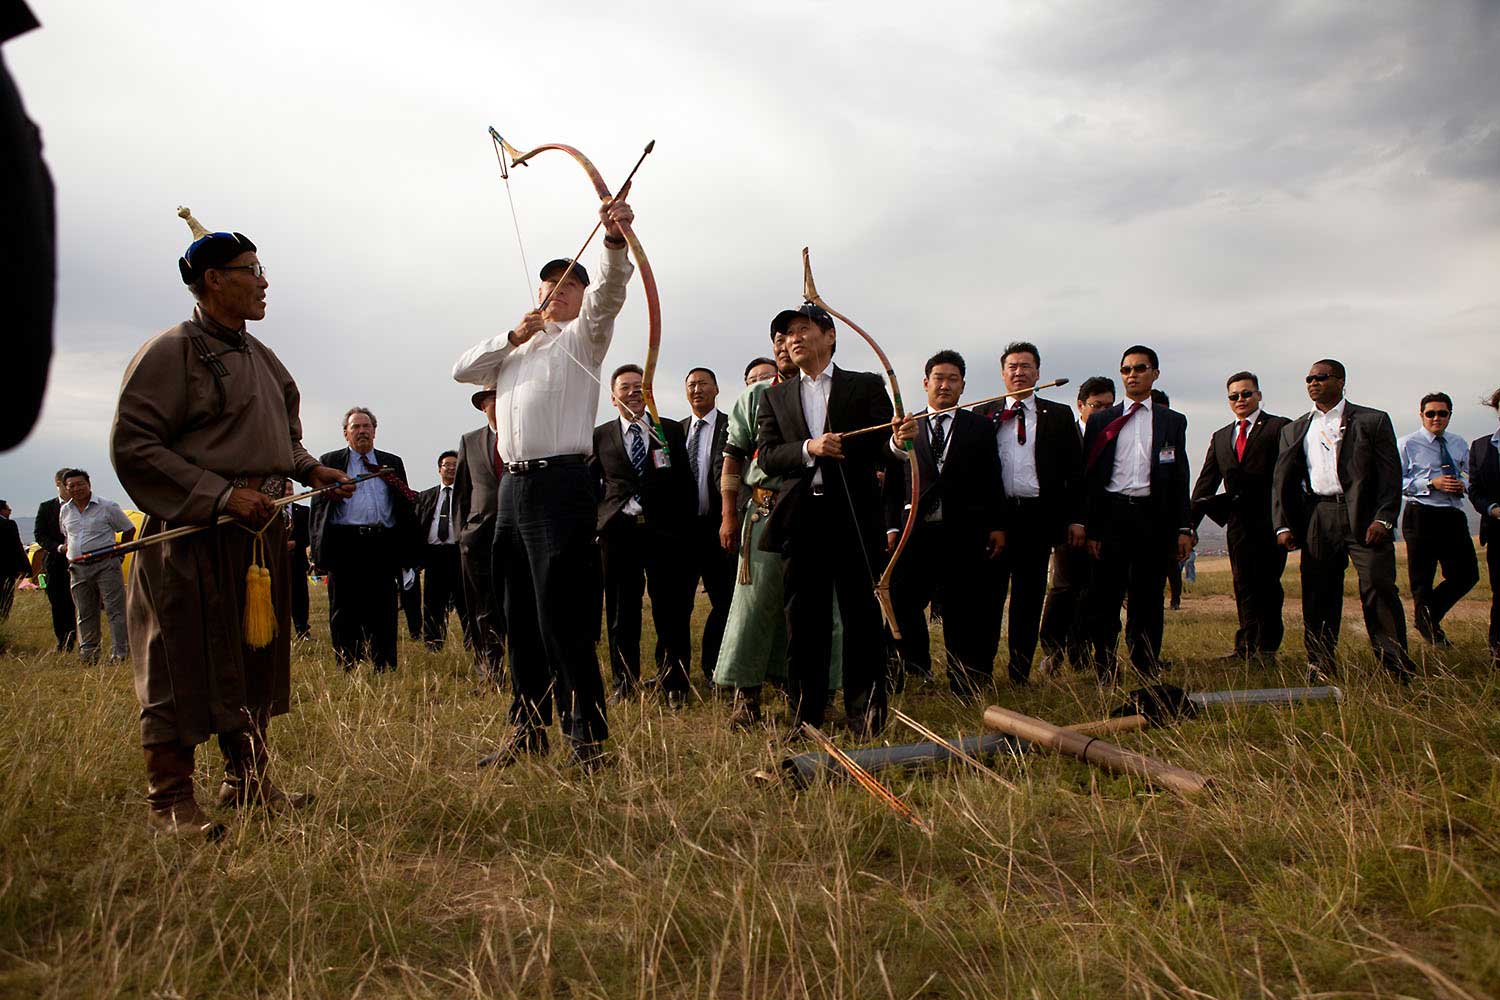 "David Lienemann captured this photograph as the Vice President draws his bow during the archery portion of a cultural demonstration, outside Ulaanbaatar, Mongolia, with Mongolian Prime Minister Sukhbaatar Batbold looking on, Aug. 22, 2011. I told David when I first saw this photo that I would never have been brave enough to stand that close to the line of fire."